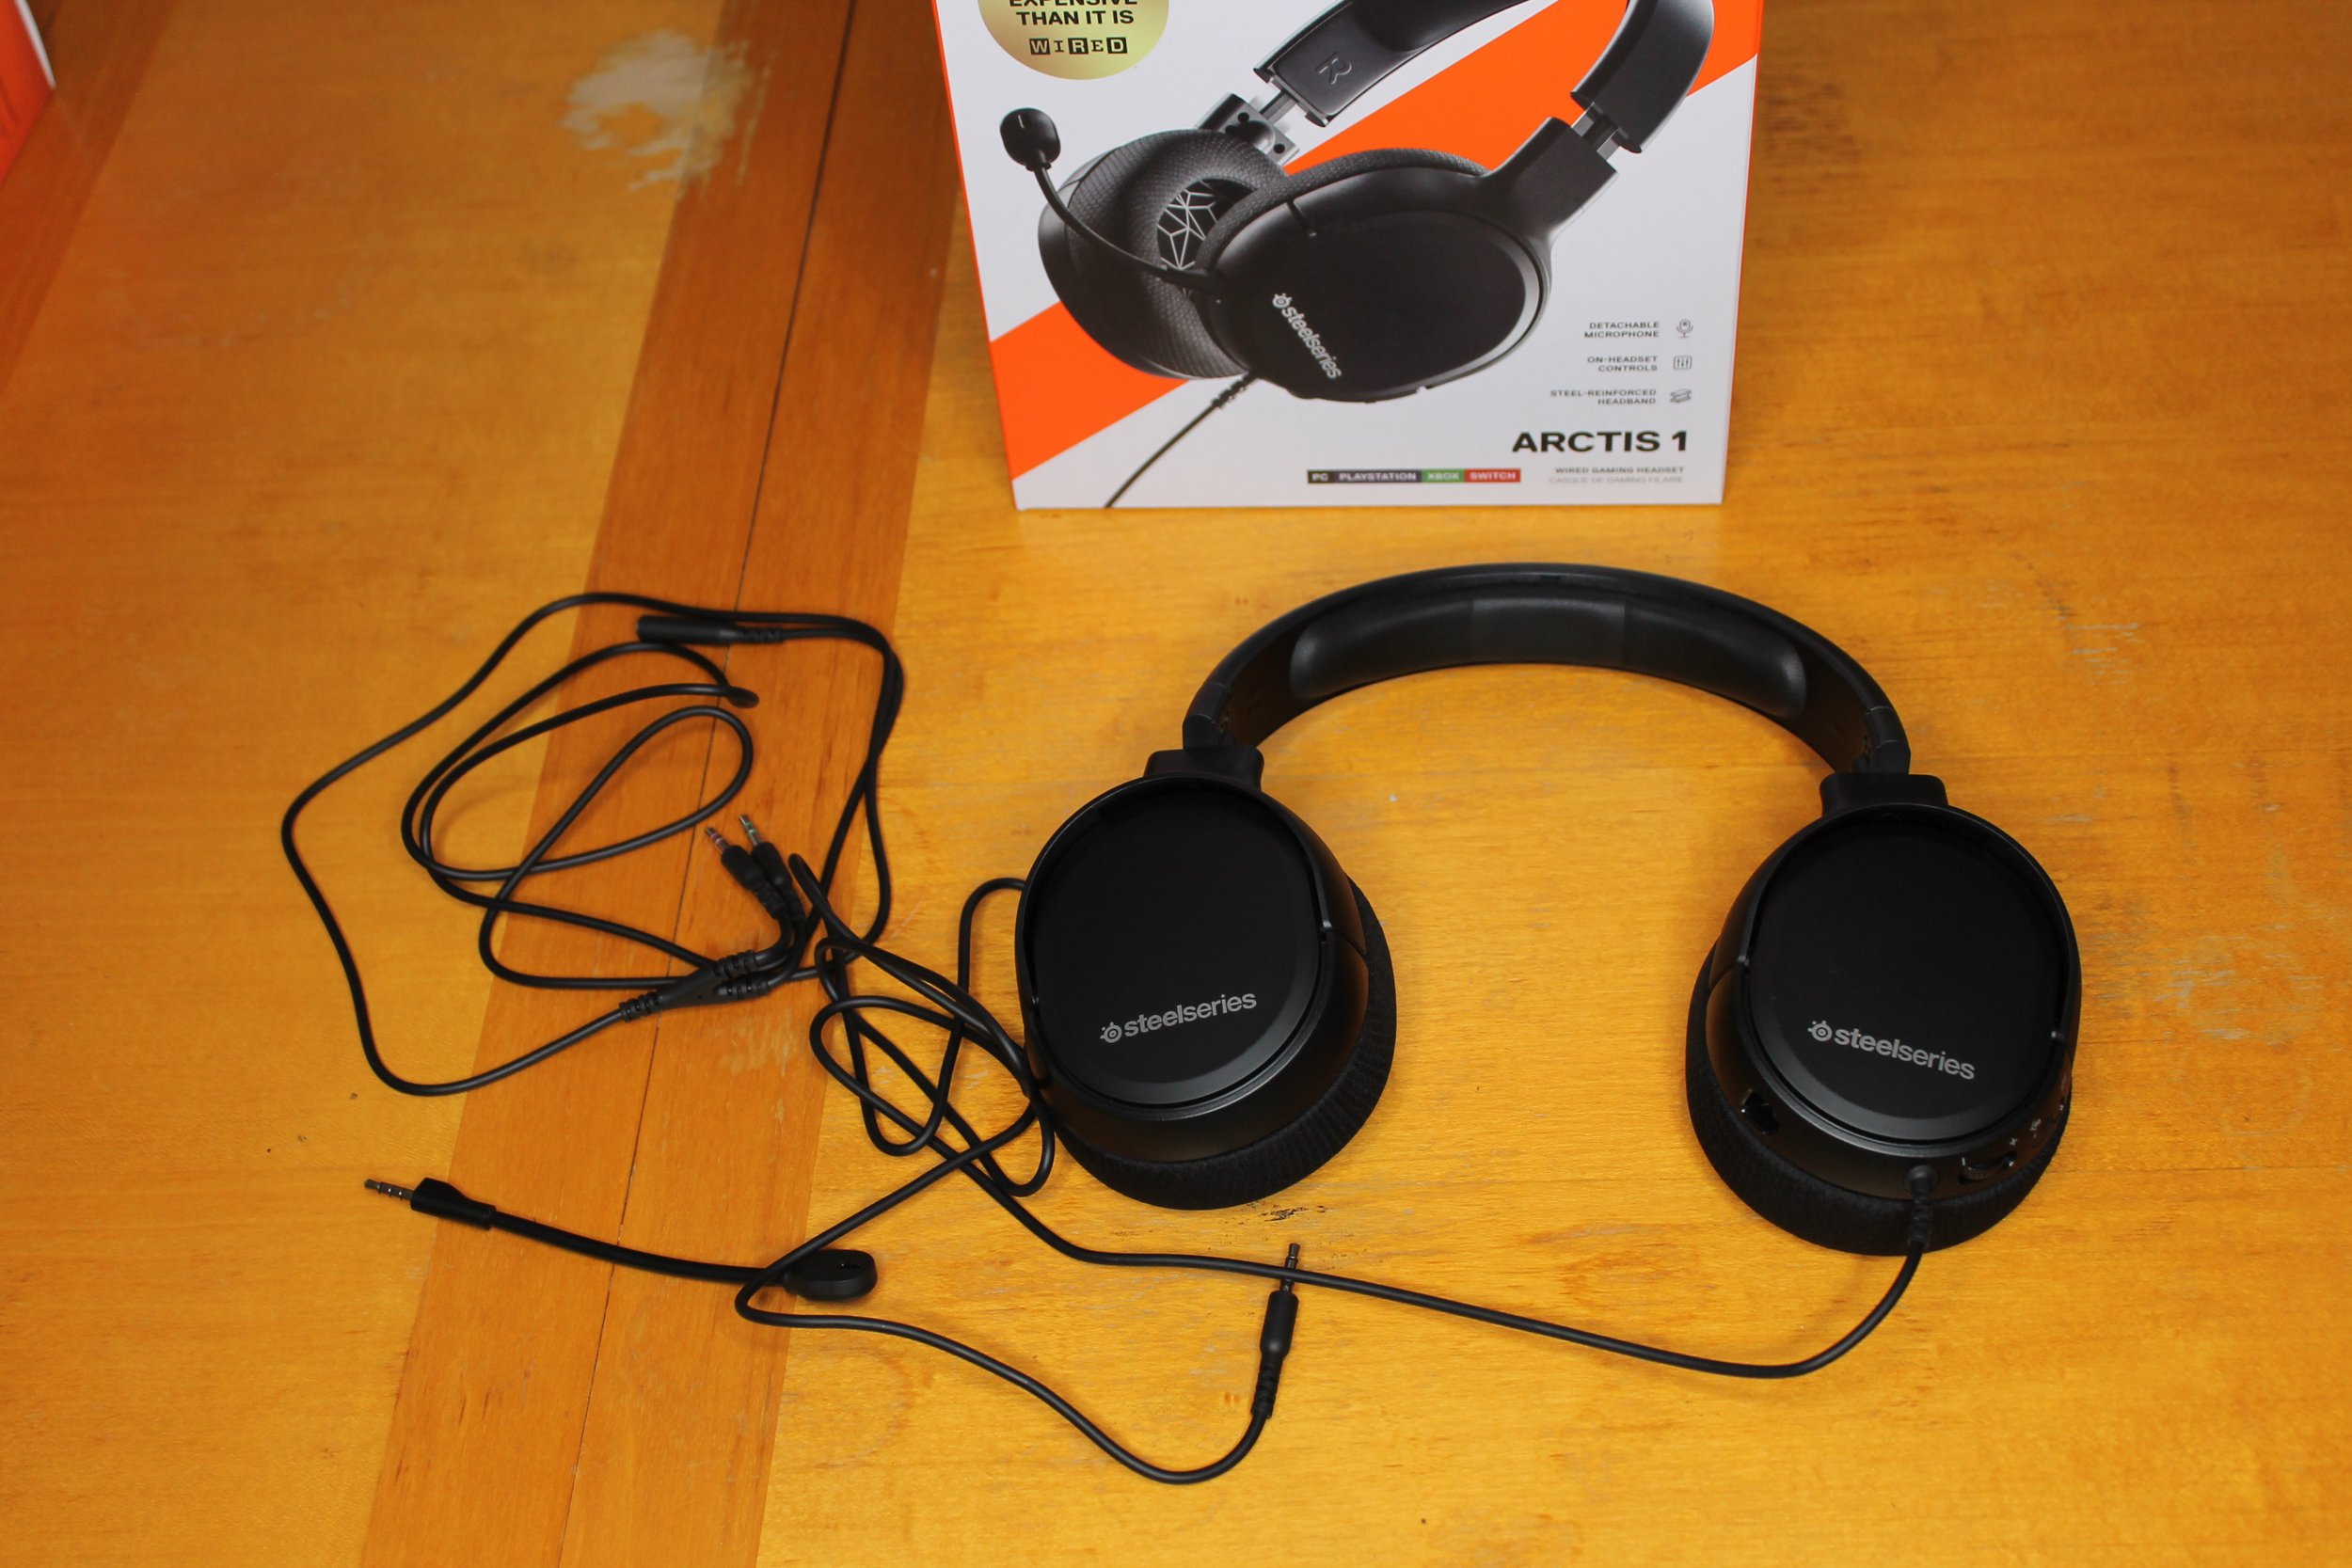 Gaming Headset steelseries arctis 1 wired